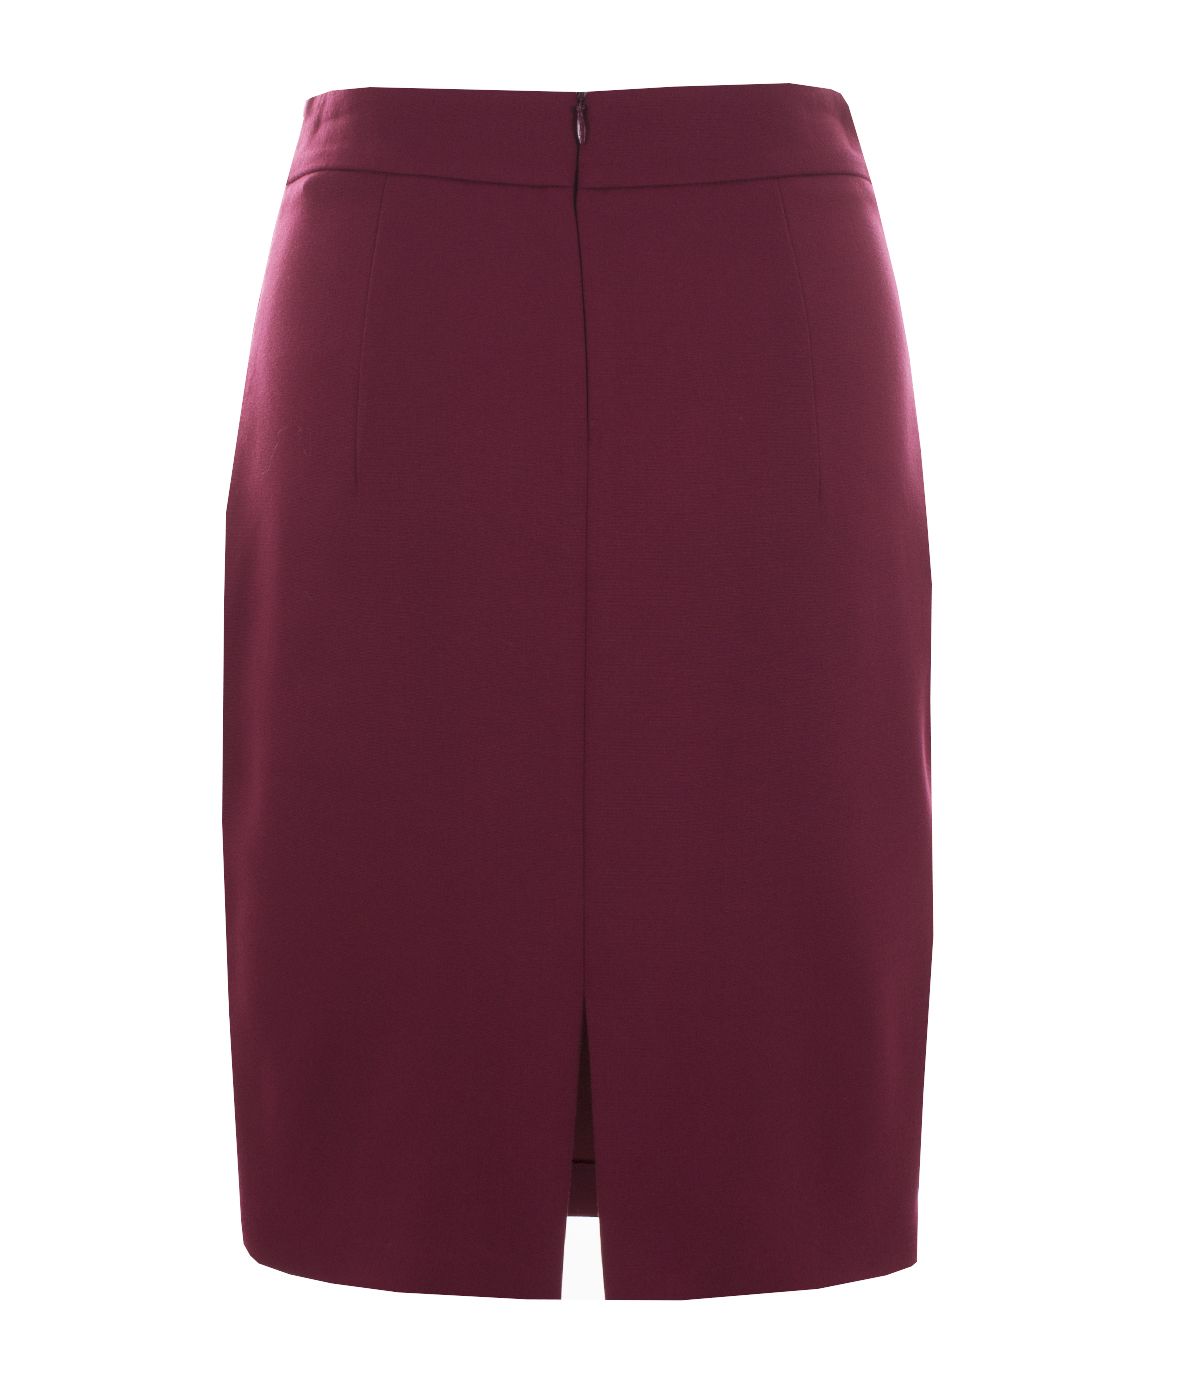 Straight skirt with side zippers, with rayon and viscose 1